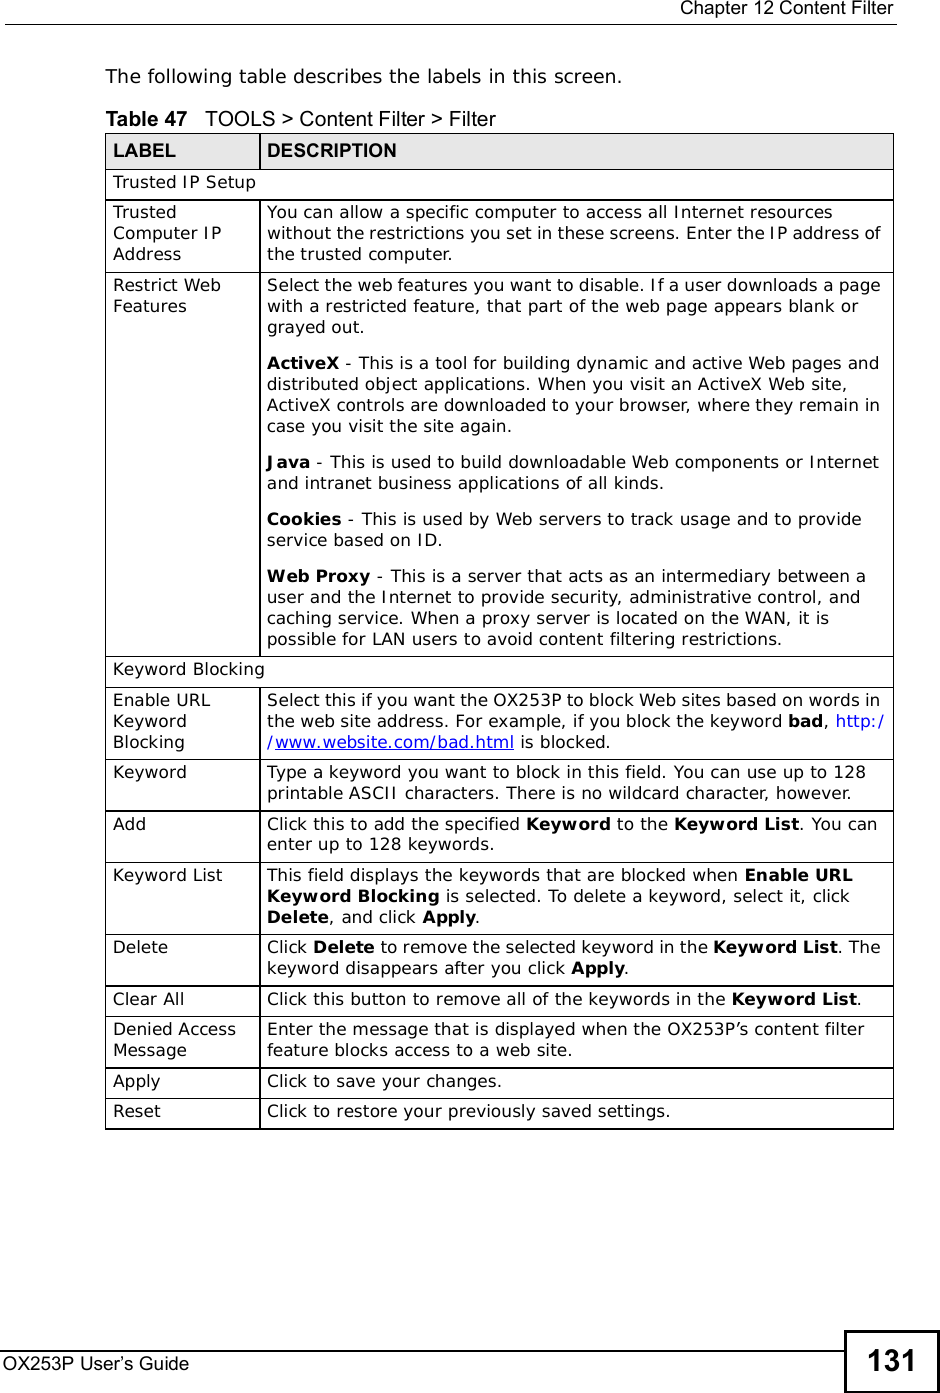  Chapter 12Content FilterOX253P User’s Guide 131The following table describes the labels in this screen.  Table 47   TOOLS &gt; Content Filter &gt; FilterLABEL DESCRIPTIONTrusted IP SetupTrusted Computer IP AddressYou can allow a specific computer to access all Internet resources without the restrictions you set in these screens. Enter the IP address of the trusted computer.Restrict Web Features Select the web features you want to disable. If a user downloads a page with a restricted feature, that part of the web page appears blank or grayed out.ActiveX - This is a tool for building dynamic and active Web pages and distributed object applications. When you visit an ActiveX Web site, ActiveX controls are downloaded to your browser, where they remain in case you visit the site again.Java - This is used to build downloadable Web components or Internet and intranet business applications of all kinds.Cookies - This is used by Web servers to track usage and to provide service based on ID.Web Proxy - This is a server that acts as an intermediary between a user and the Internet to provide security, administrative control, and caching service. When a proxy server is located on the WAN, it is possible for LAN users to avoid content filtering restrictions.Keyword BlockingEnable URL Keyword BlockingSelect this if you want the OX253P to block Web sites based on words in the web site address. For example, if you block the keyword bad,http://www.website.com/bad.html is blocked.Keyword Type a keyword you want to block in this field. You can use up to 128 printable ASCII characters. There is no wildcard character, however.Add Click this to add the specified Keyword to the Keyword List. You can enter up to 128 keywords.Keyword List This field displays the keywords that are blocked when Enable URL Keyword Blocking is selected. To delete a keyword, select it, click Delete, and click Apply.Delete Click Delete to remove the selected keyword in the Keyword List. The keyword disappears after you click Apply.Clear All Click this button to remove all of the keywords in the Keyword List.Denied Access Message Enter the message that is displayed when the OX253P’s content filter feature blocks access to a web site.Apply Click to save your changes.Reset Click to restore your previously saved settings.